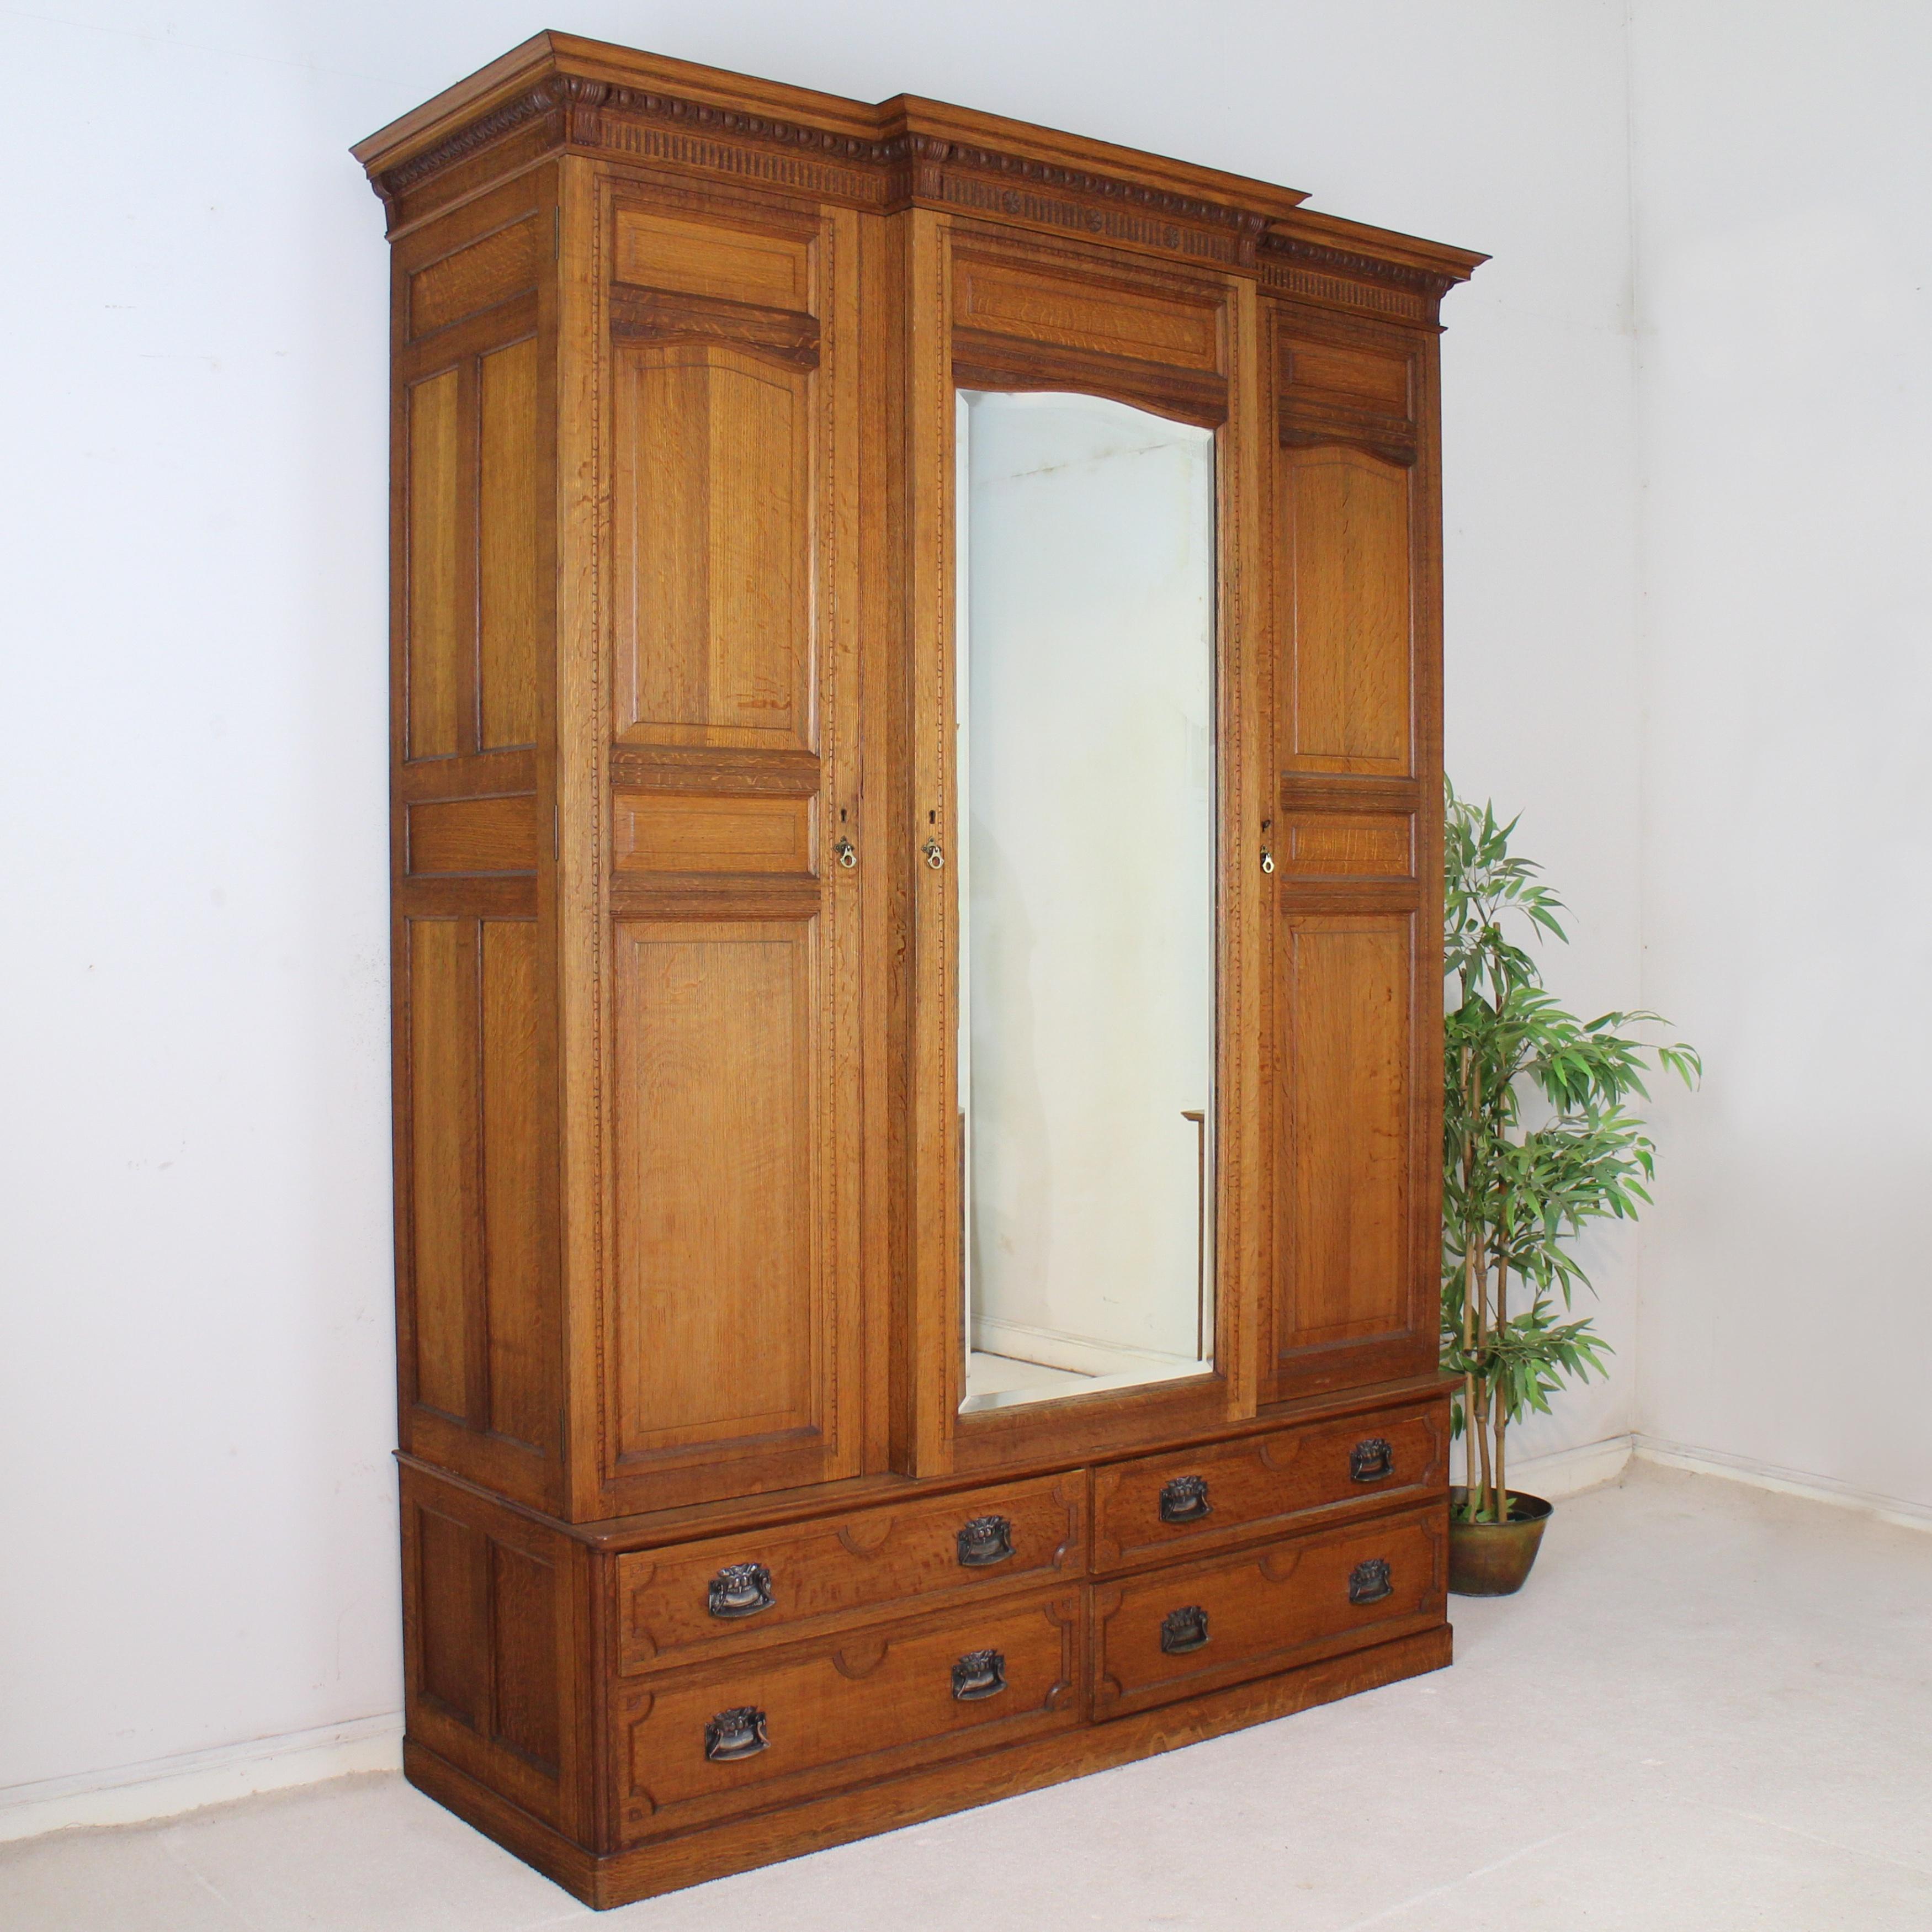 A superb quality four piece oak bedroom suite attributed to Maple & Co of London and dating to the late 19th/early 20th century. In golden quarter-sawn oak this beautiful suite features egg and dart moldings with fluting and floral emblems to the